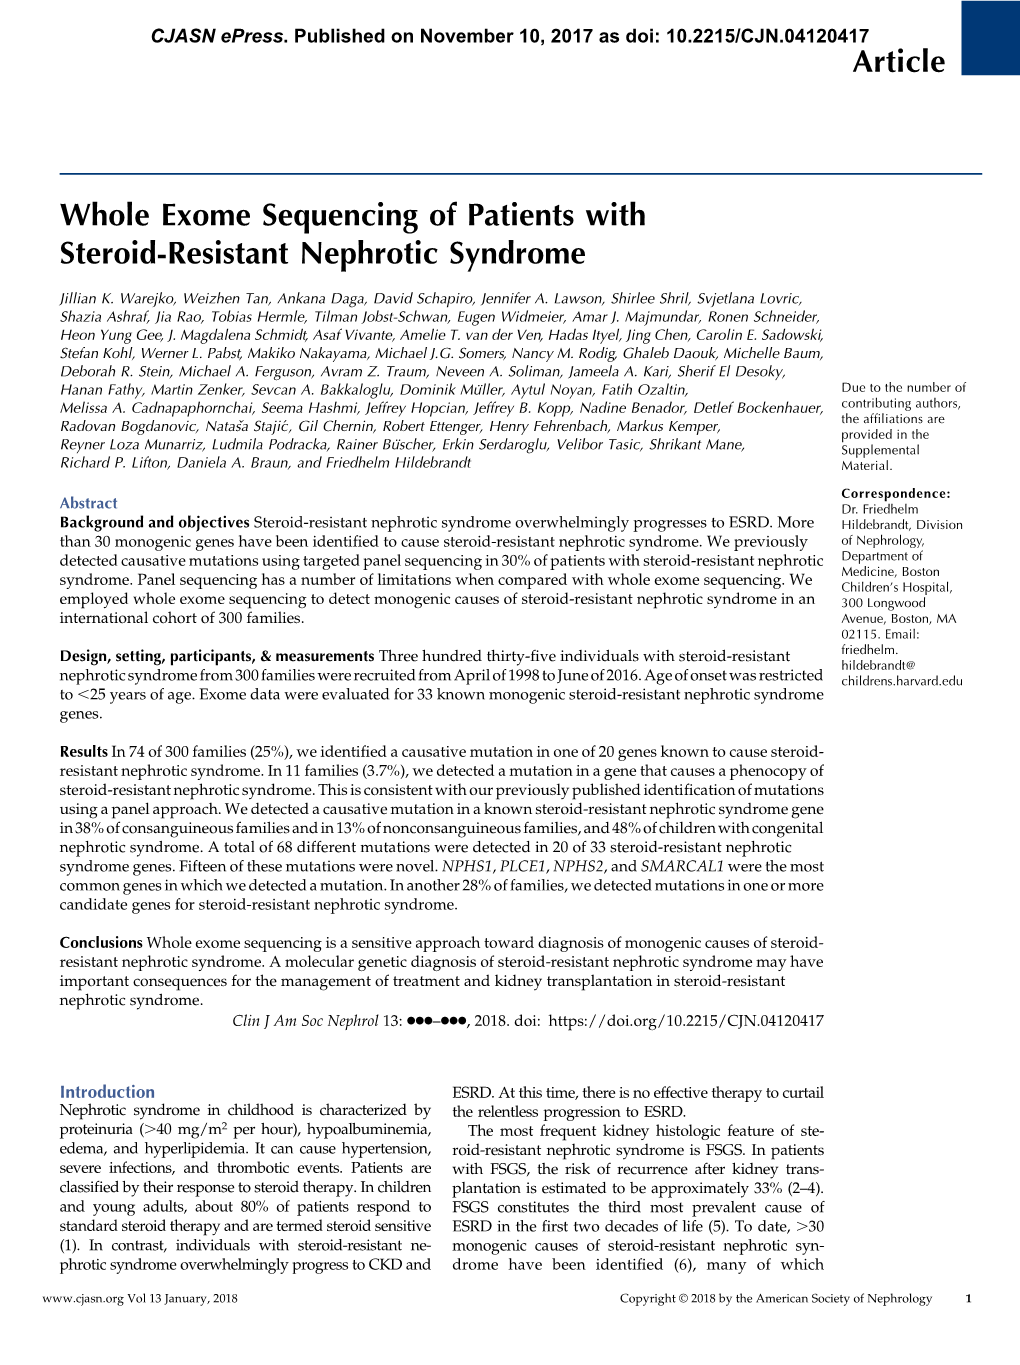 Whole Exome Sequencing of Patients with Steroid-Resistant Nephrotic Syndrome